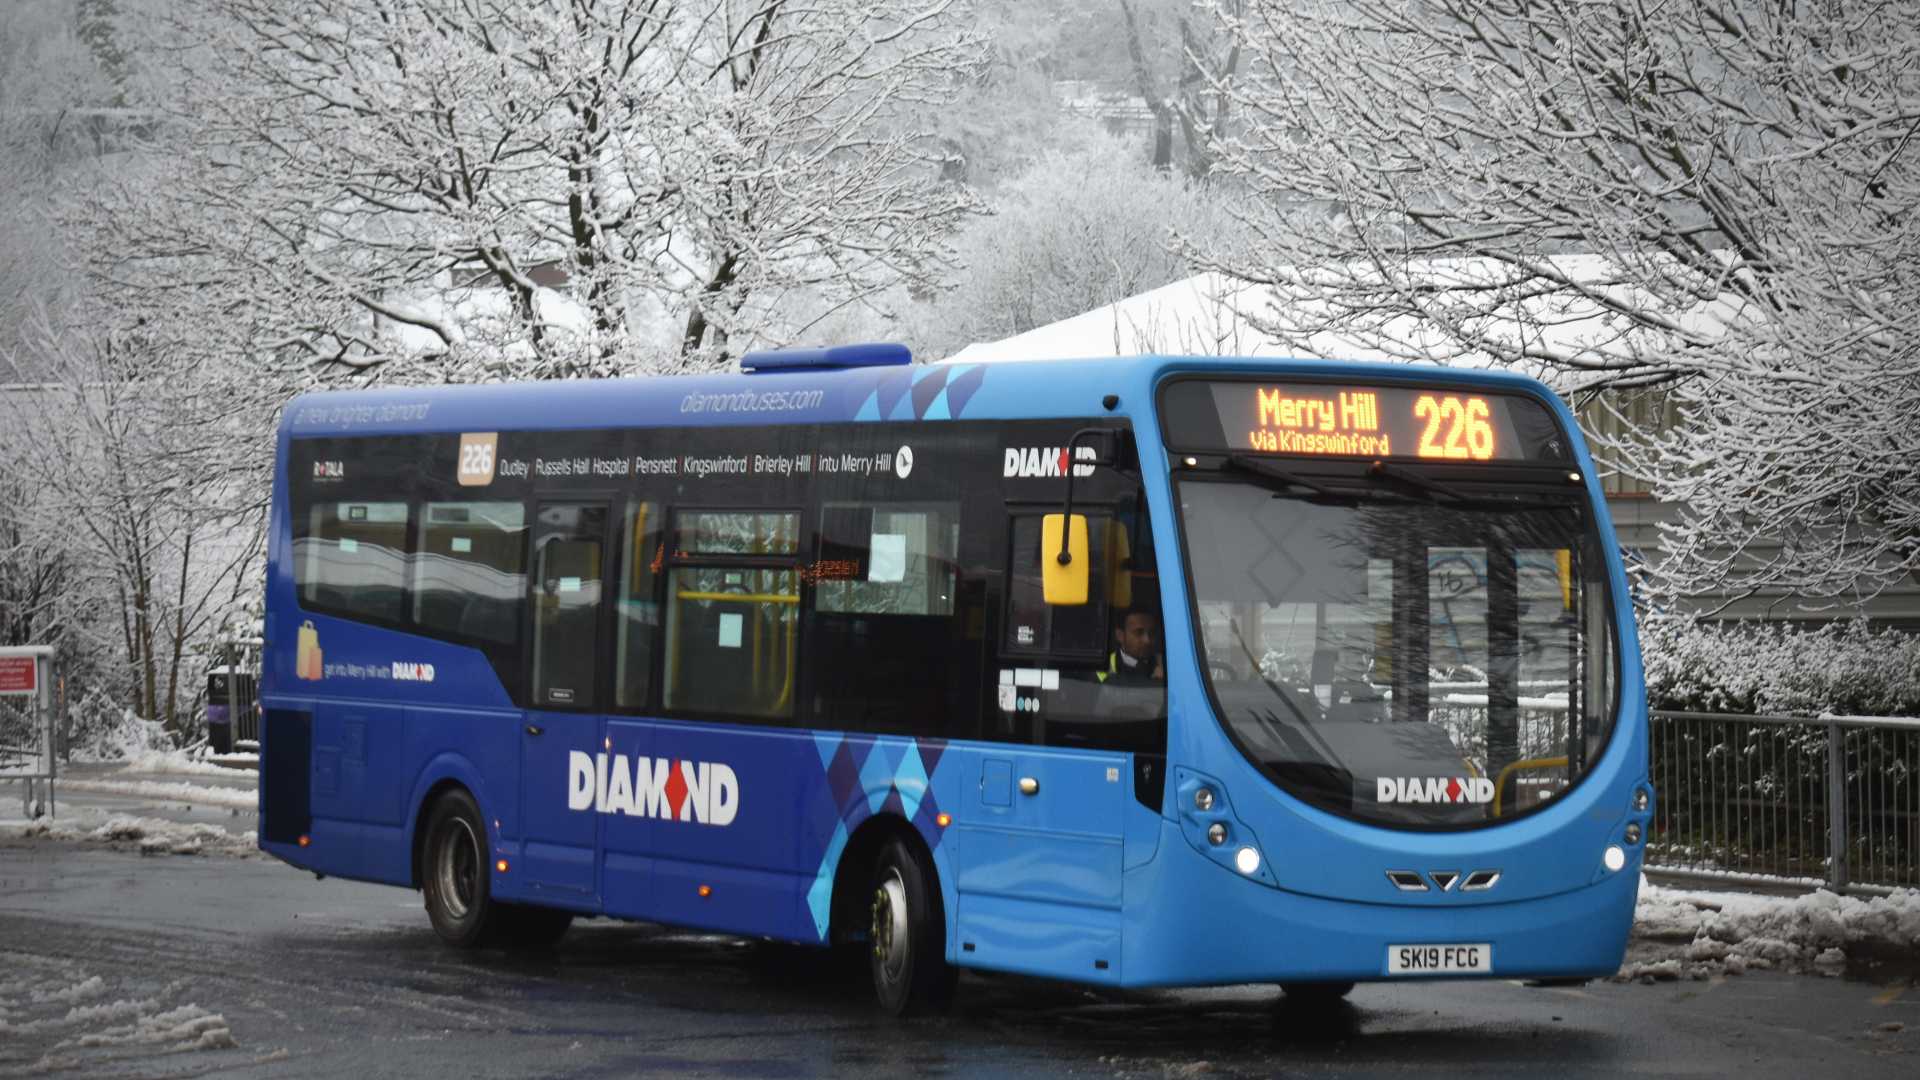 Diamond 20167 navigates a snowy Dudley Bus Station on its way to Merry Hill.